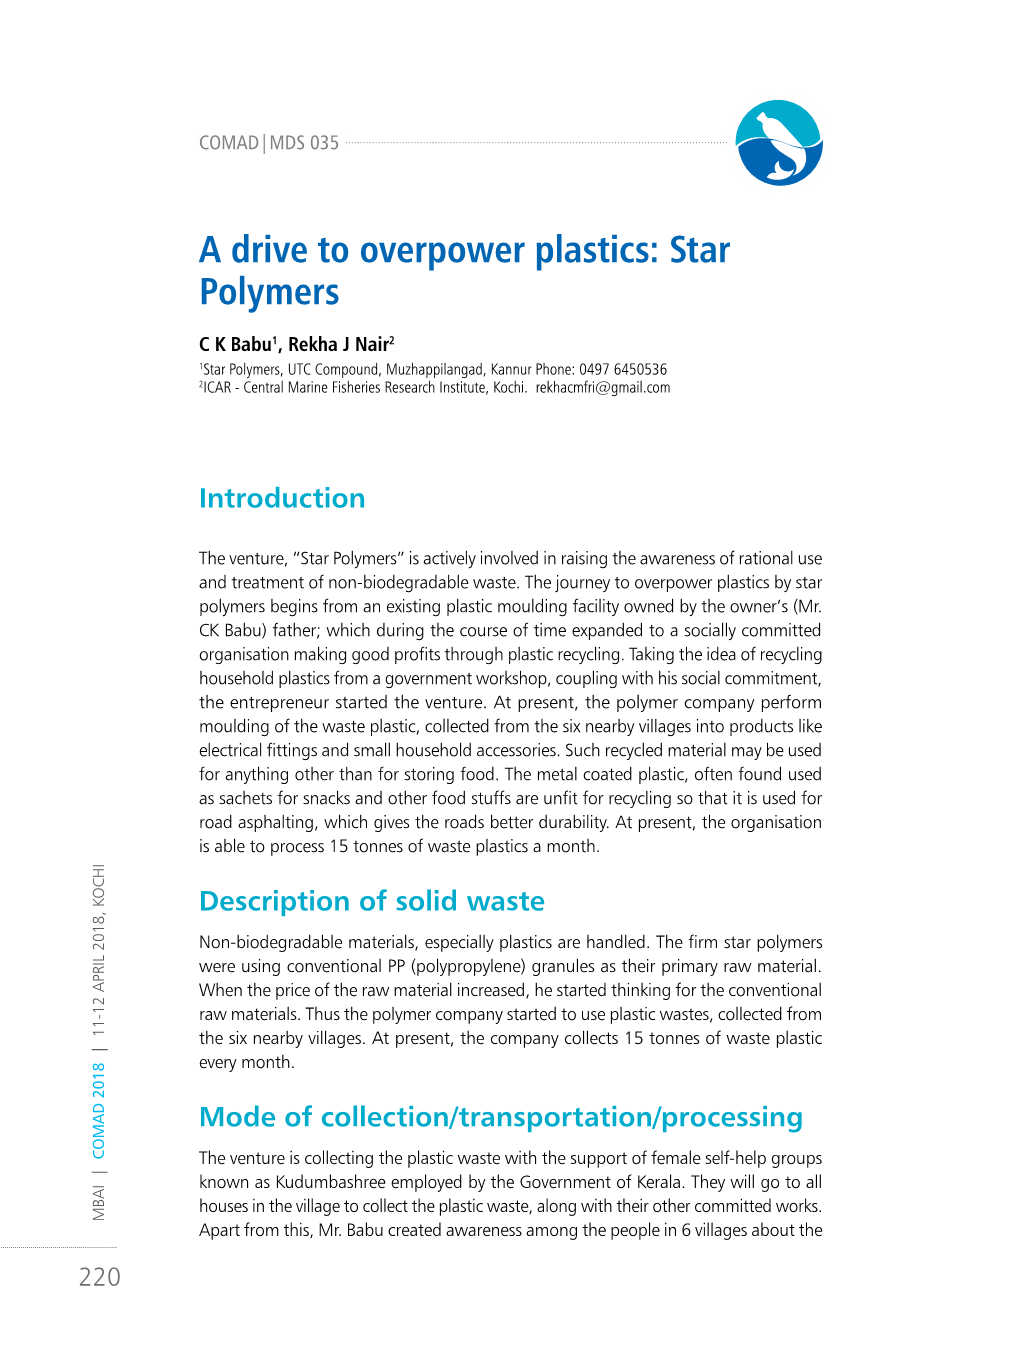 A Drive to Overpower Plastics: Star Polymers